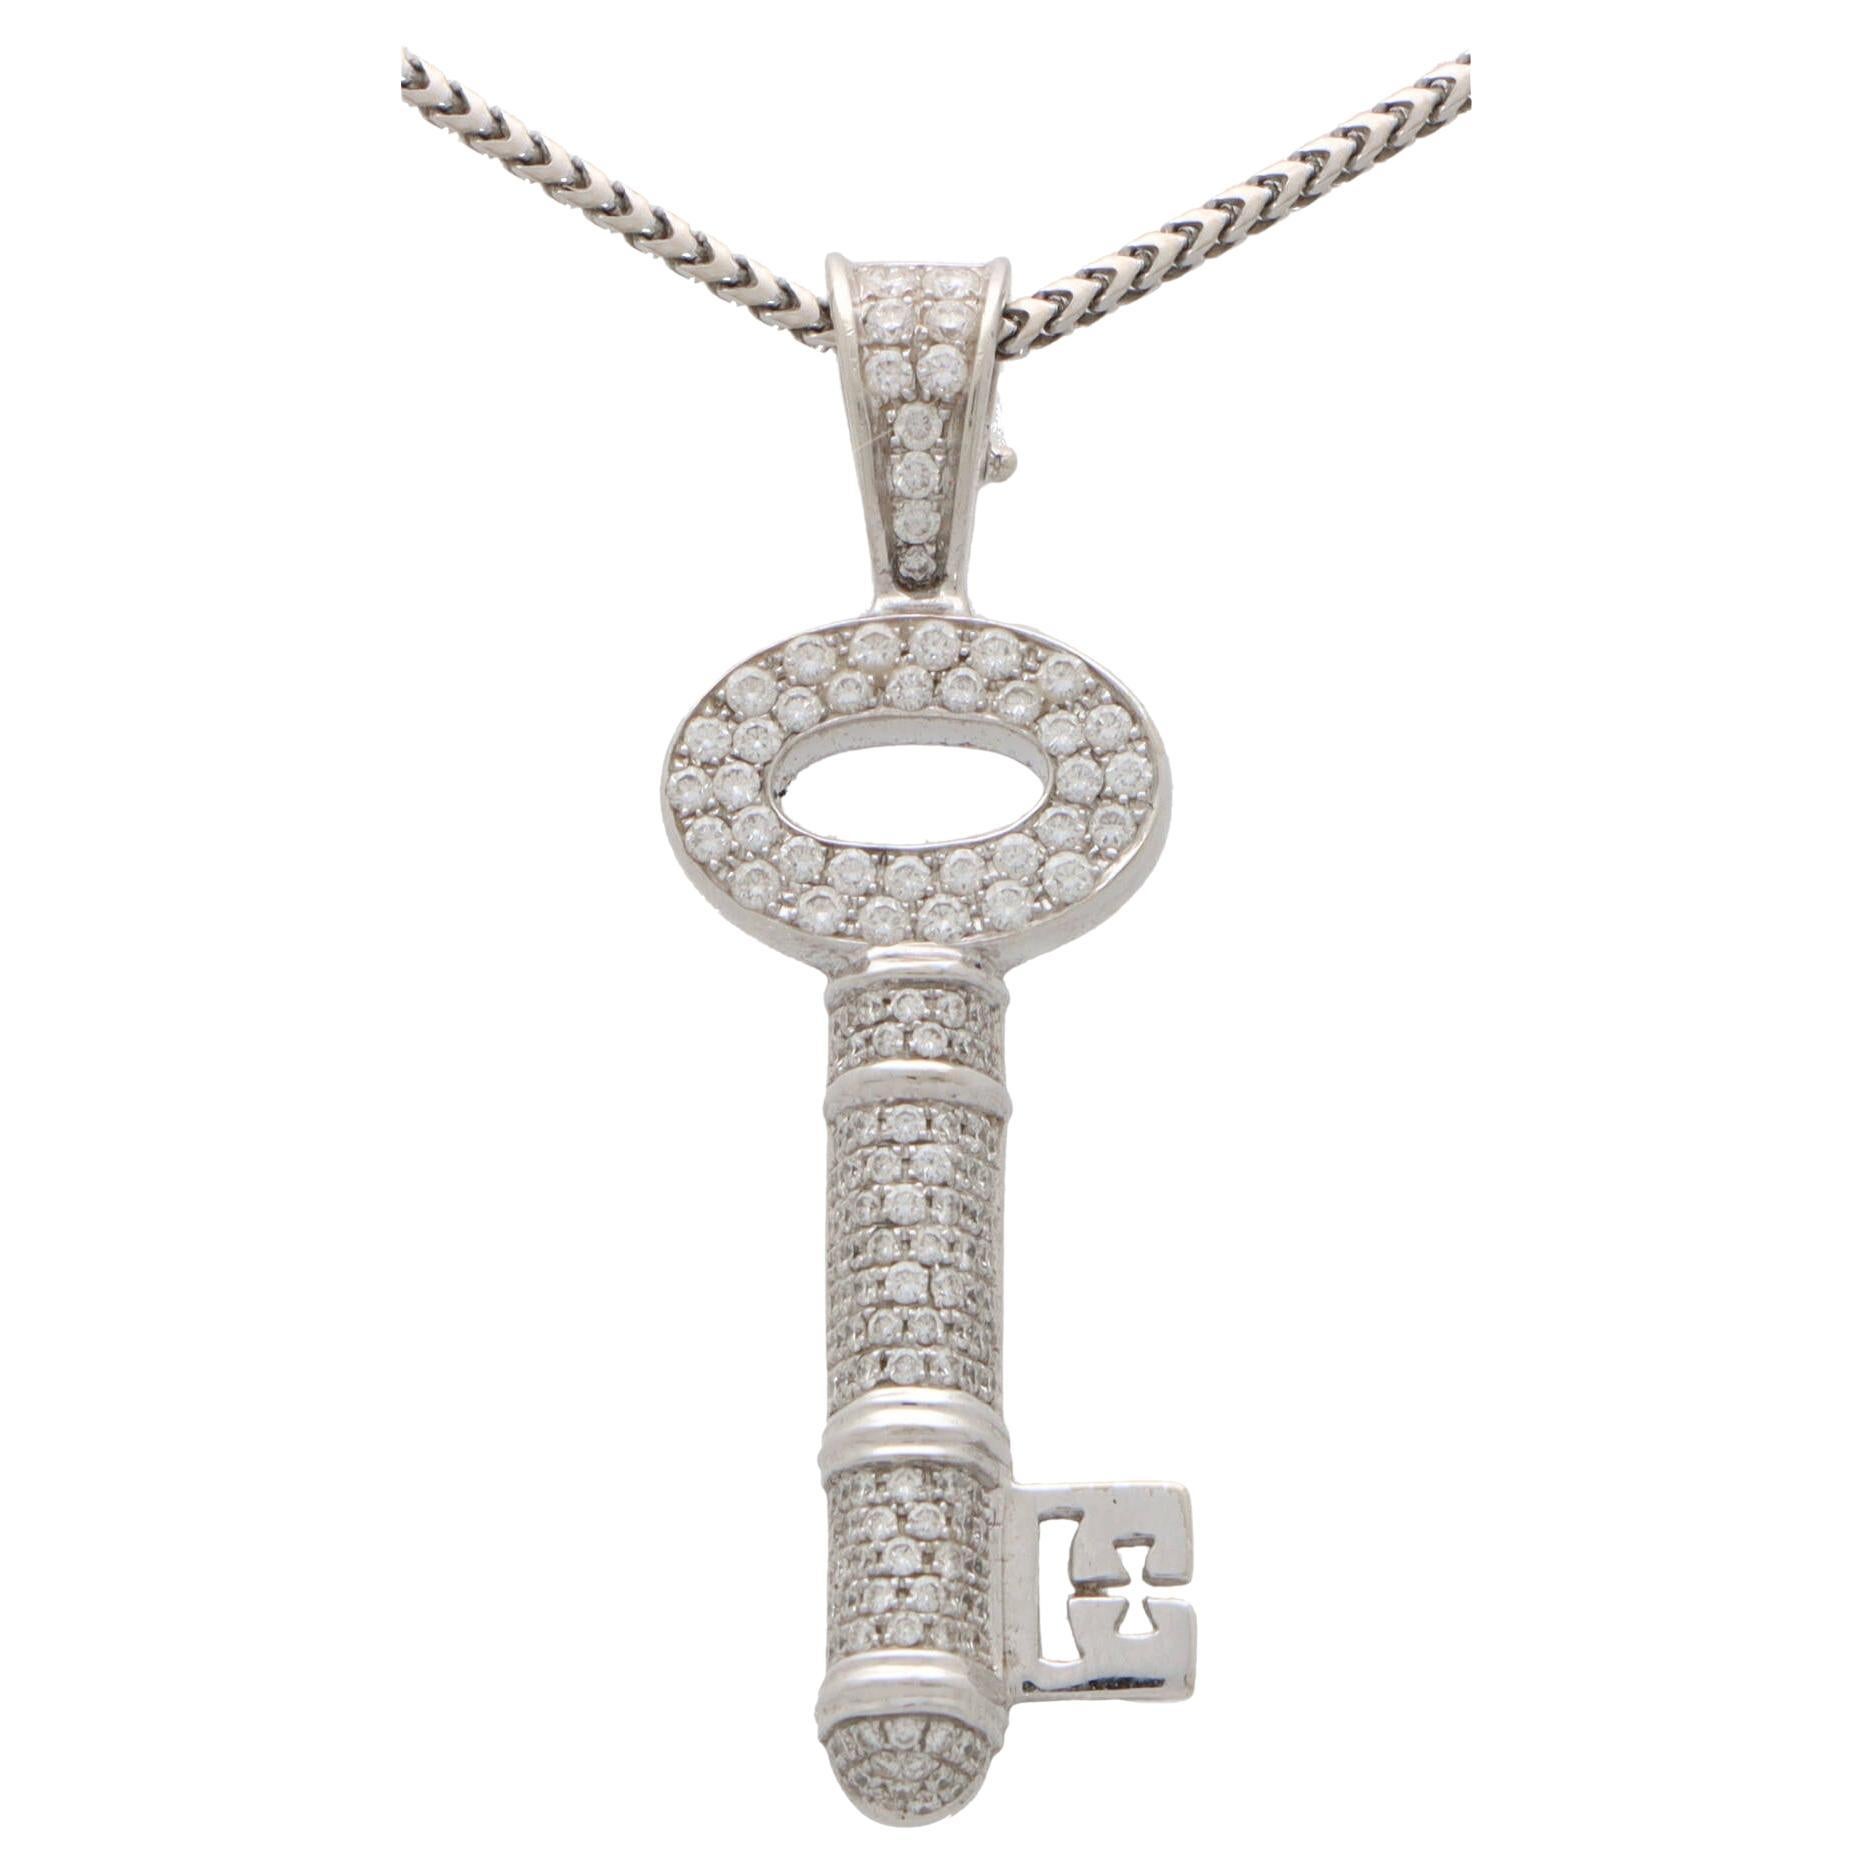  Vintage Theo Fennell Diamond Key Necklace Set in 18k White Gold